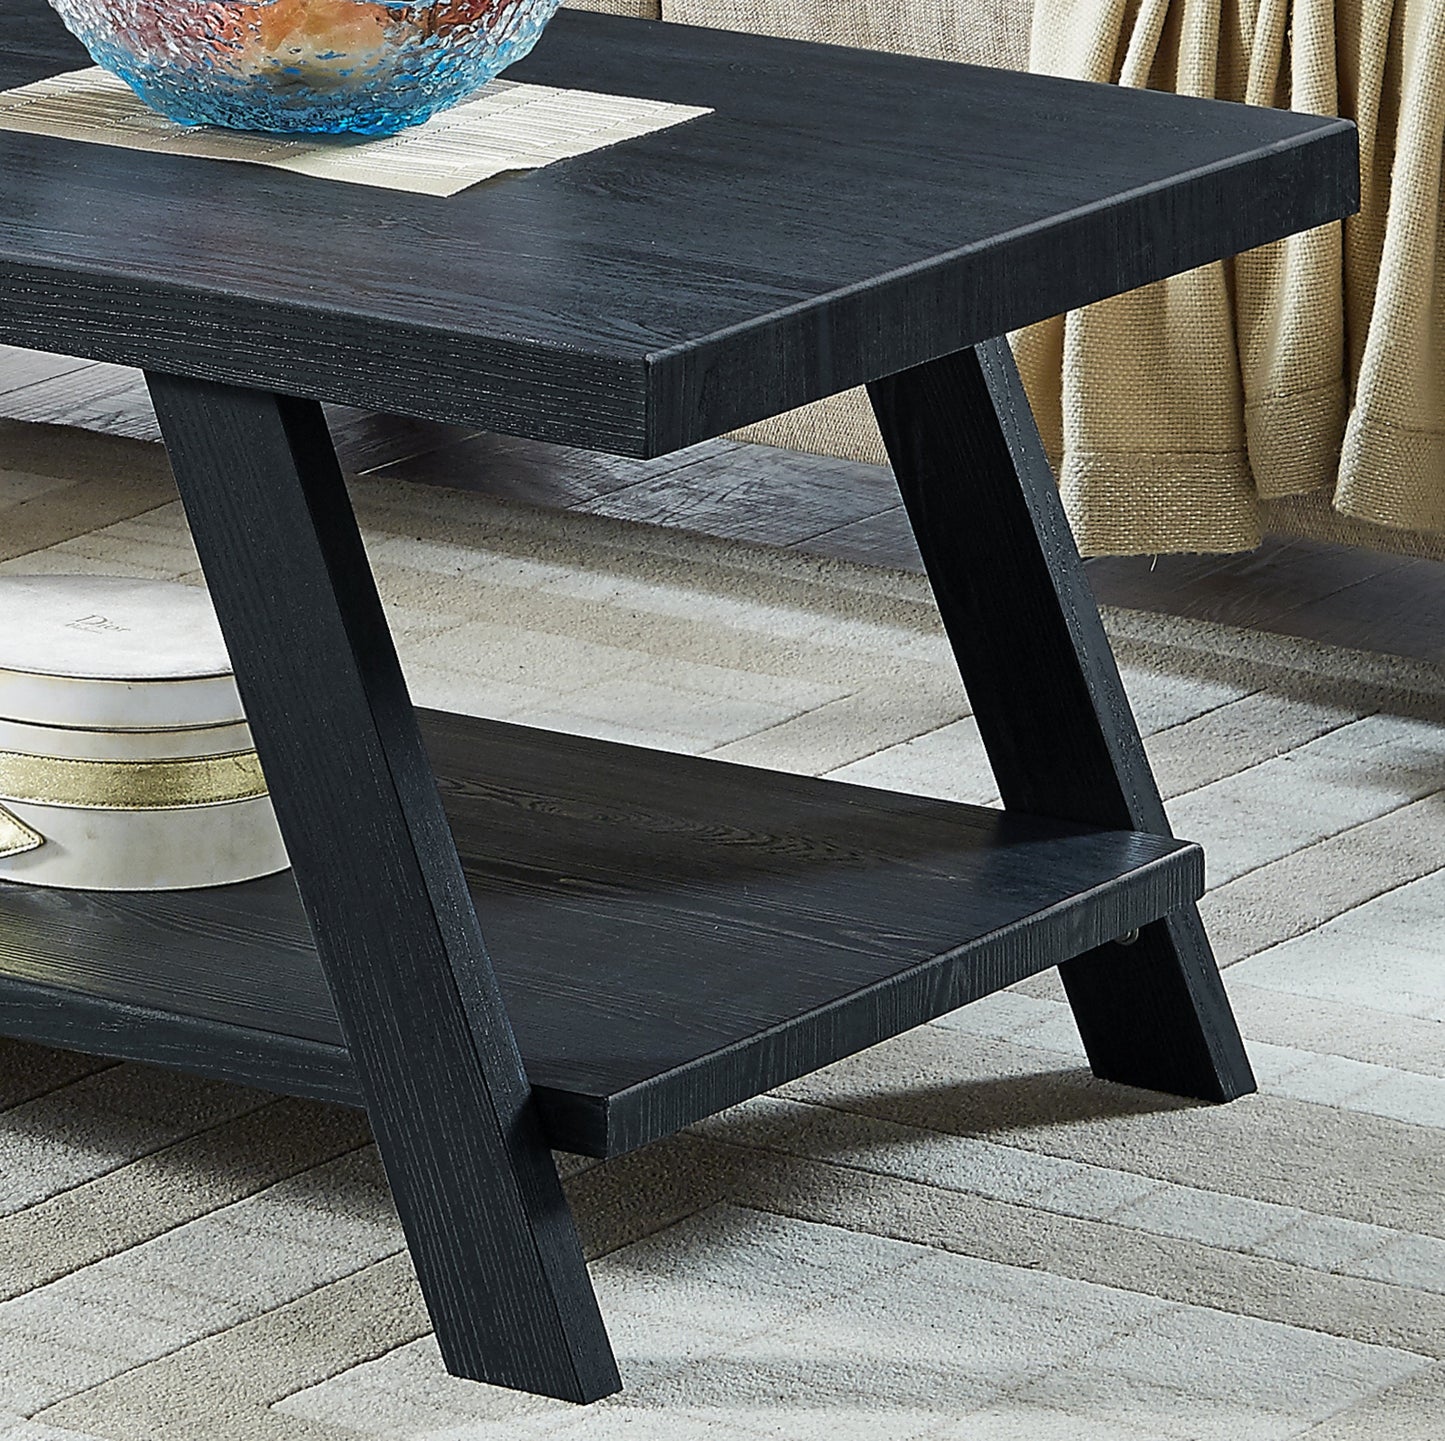 Athens Contemporary Replicated Wood Shelf Coffee Set Table in Black Finish